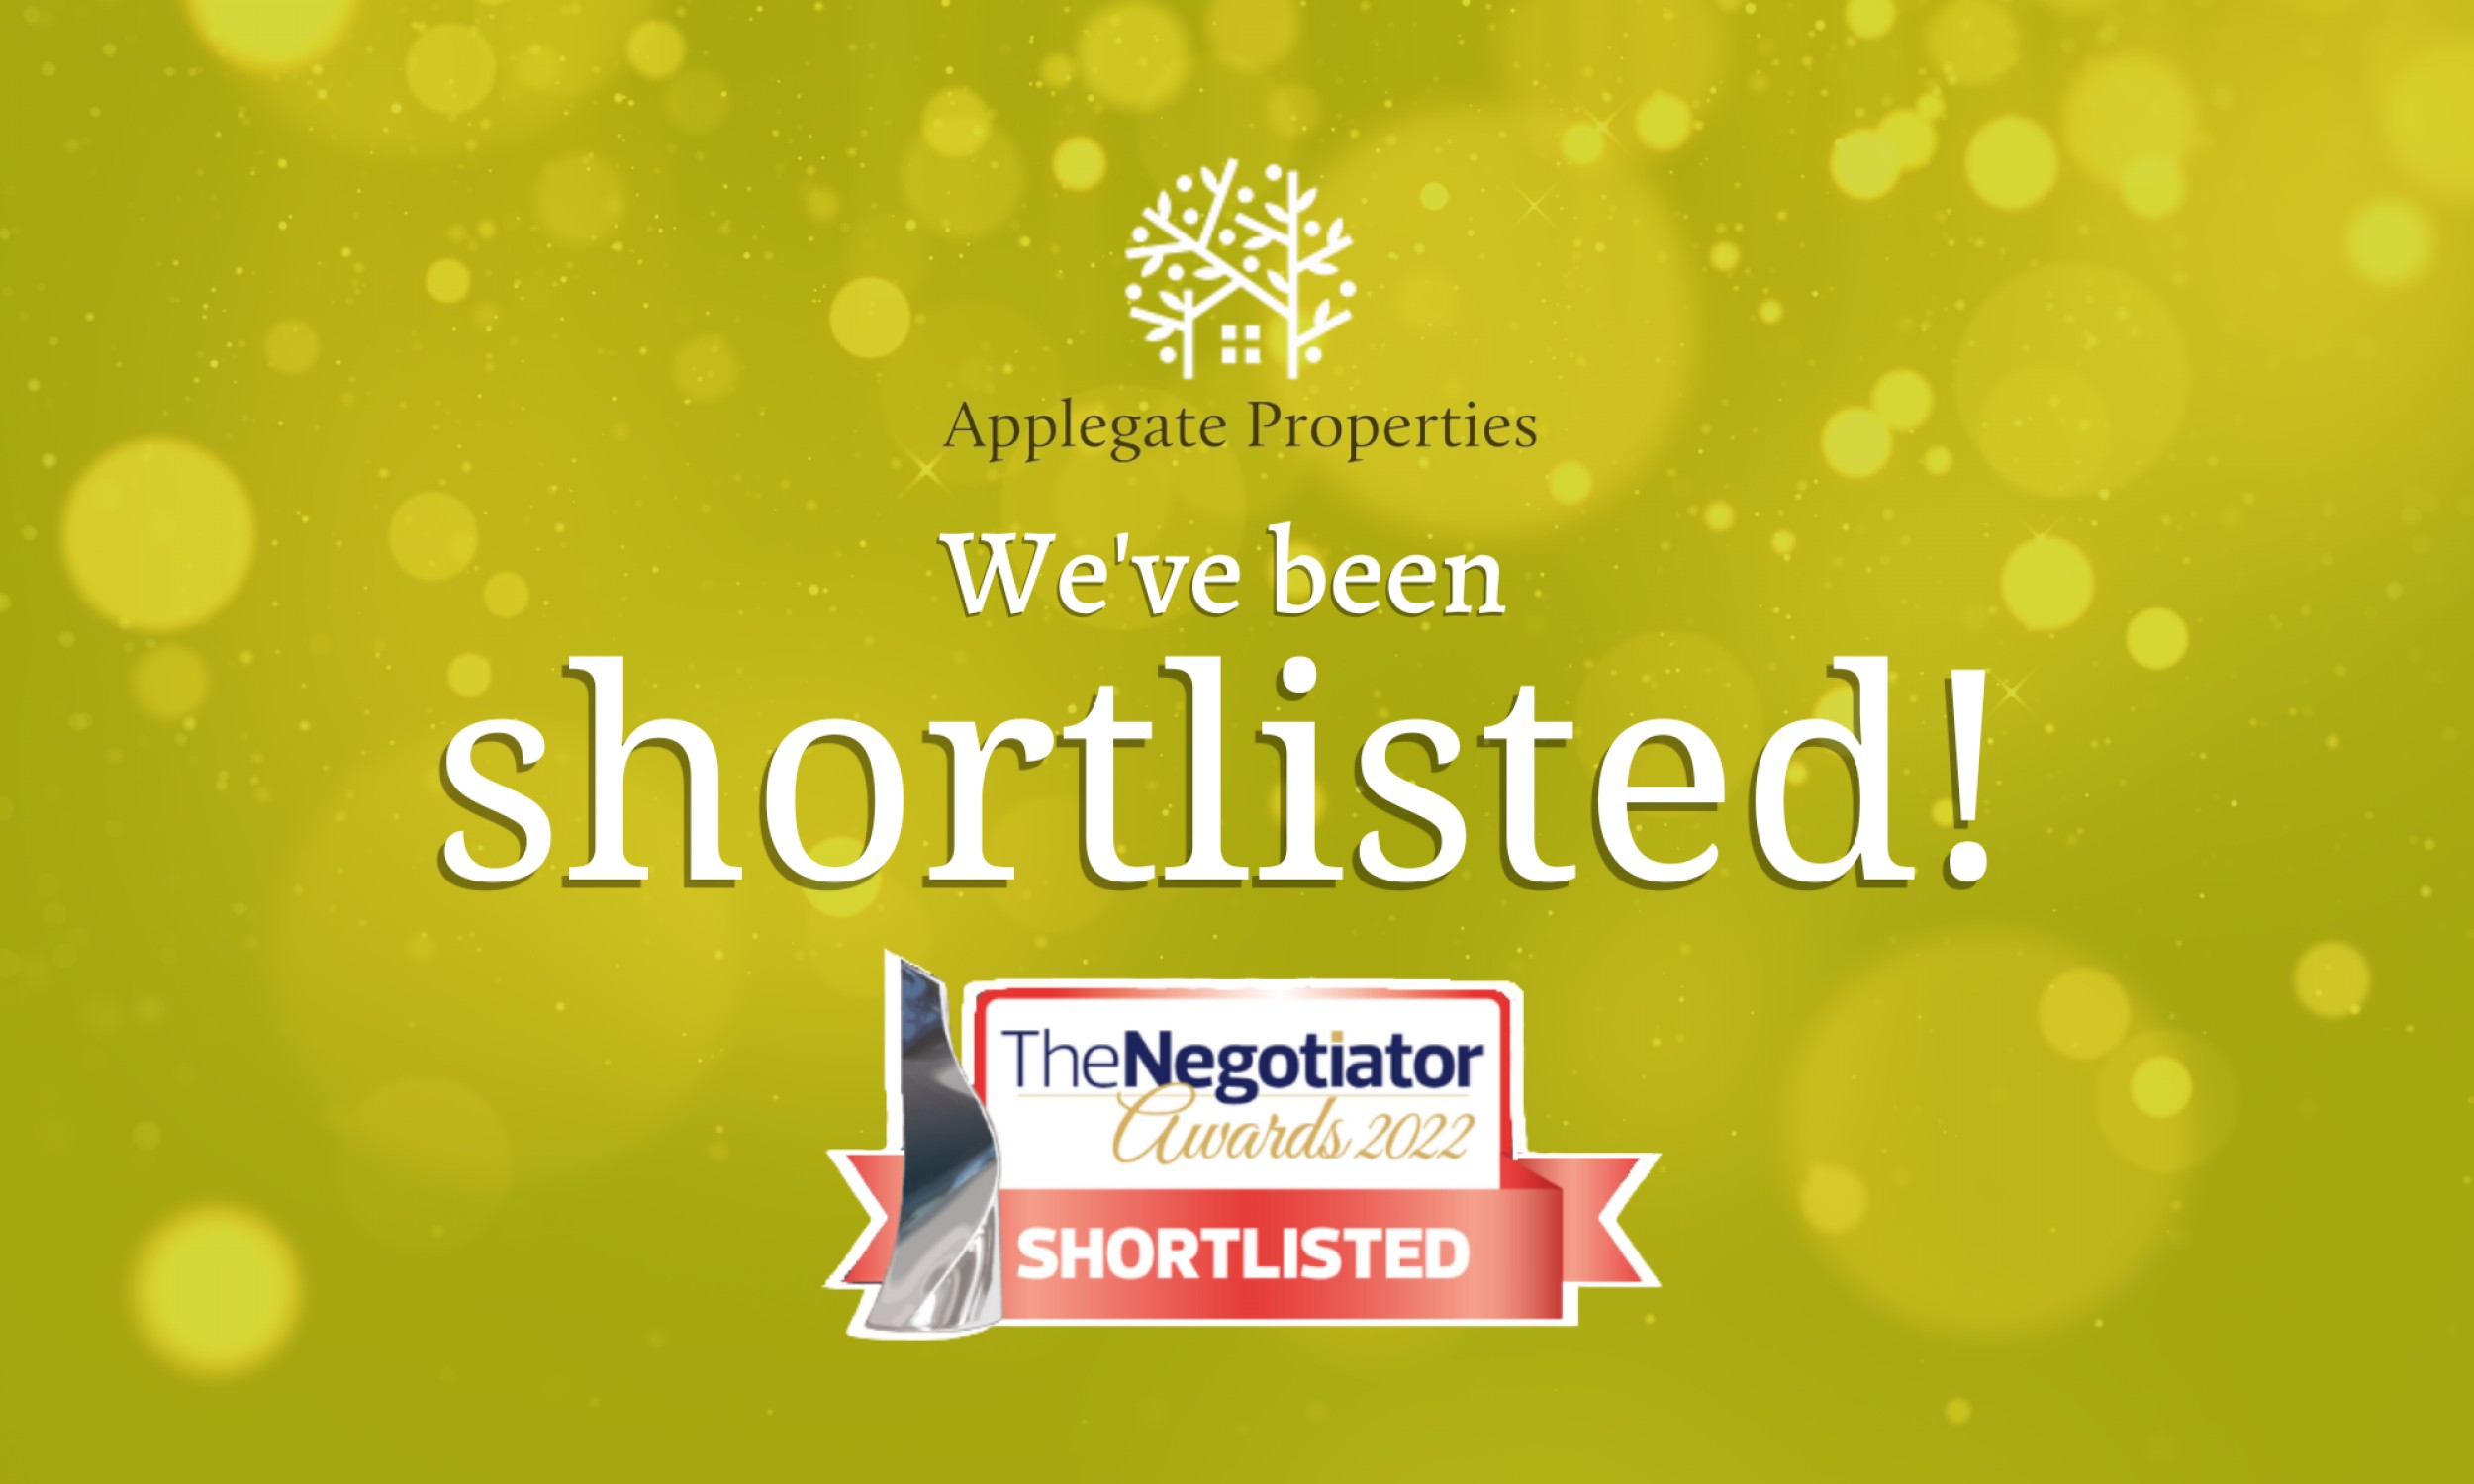 Applegate Properties secures quintet of nominations for the Negotiator Awards